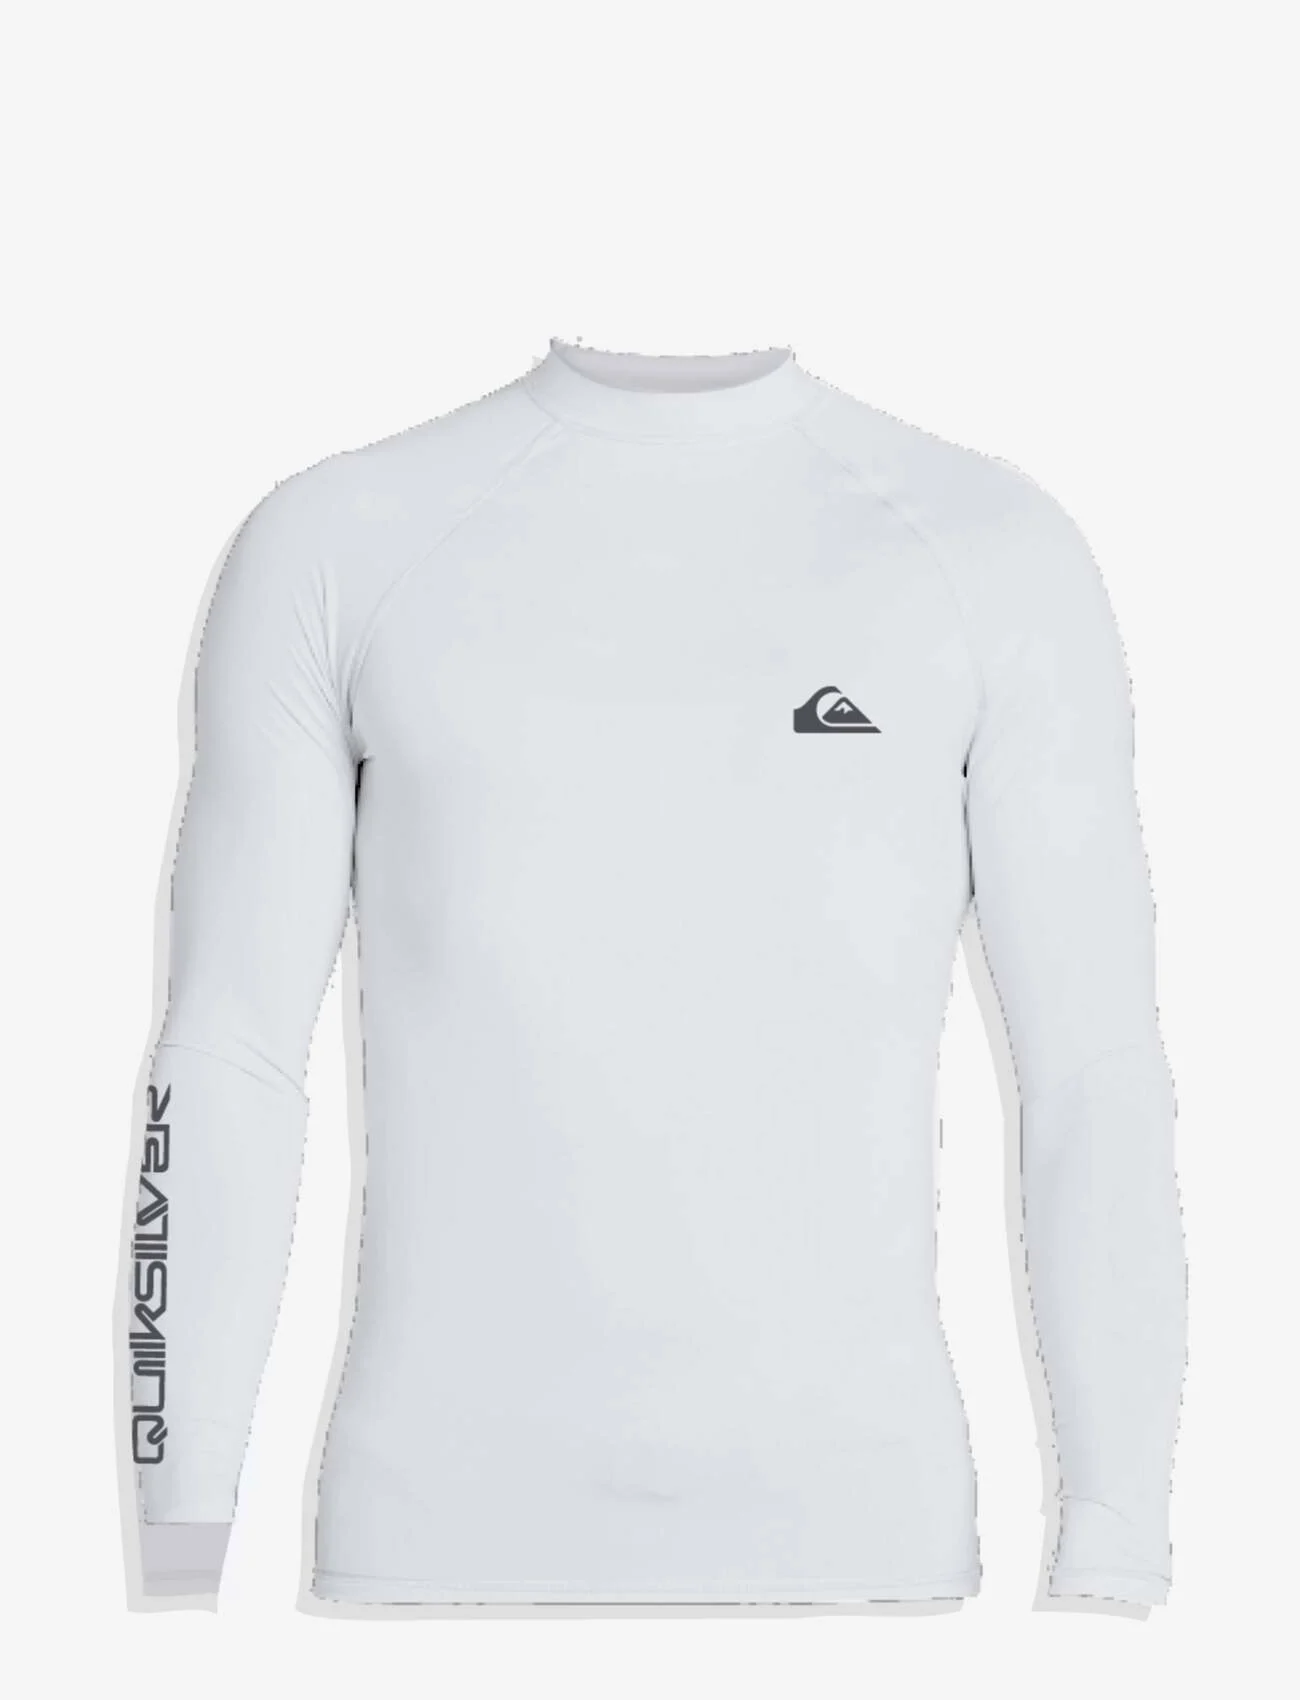 Quiksilver - EVERYDAY UPF50 LS YOUTH - long-sleeved - white - 0